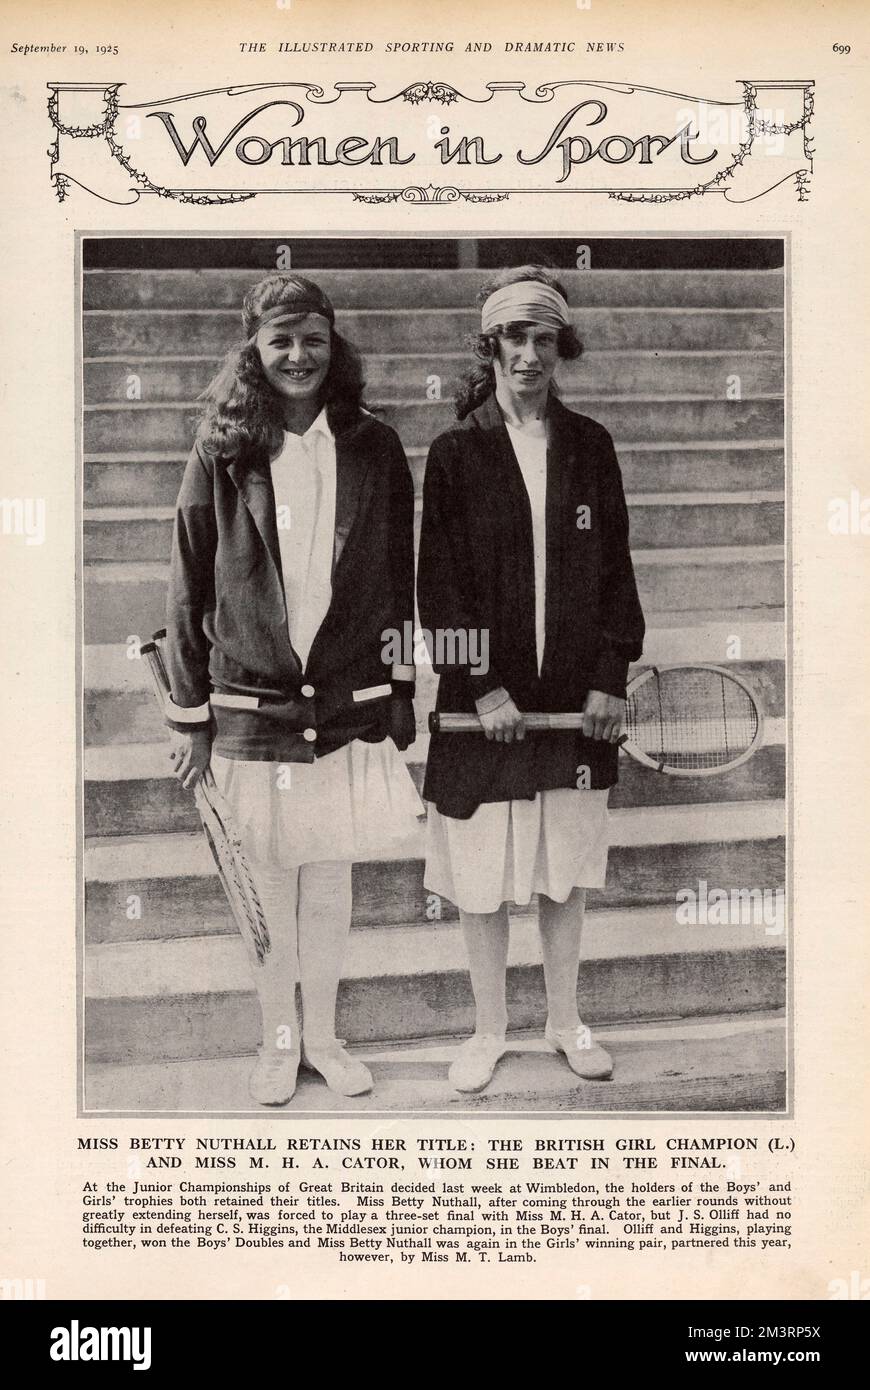 Winner and runner up of the girls' tennis junior championship of Great Britain at Wimbledon in 1925, Miss Betty Nuthall and Miss M. H. A. Cator.  Featured in The Illustrated Sporting &amp; Dramatic News's weekly Women in Sport section.  1925 Stock Photo